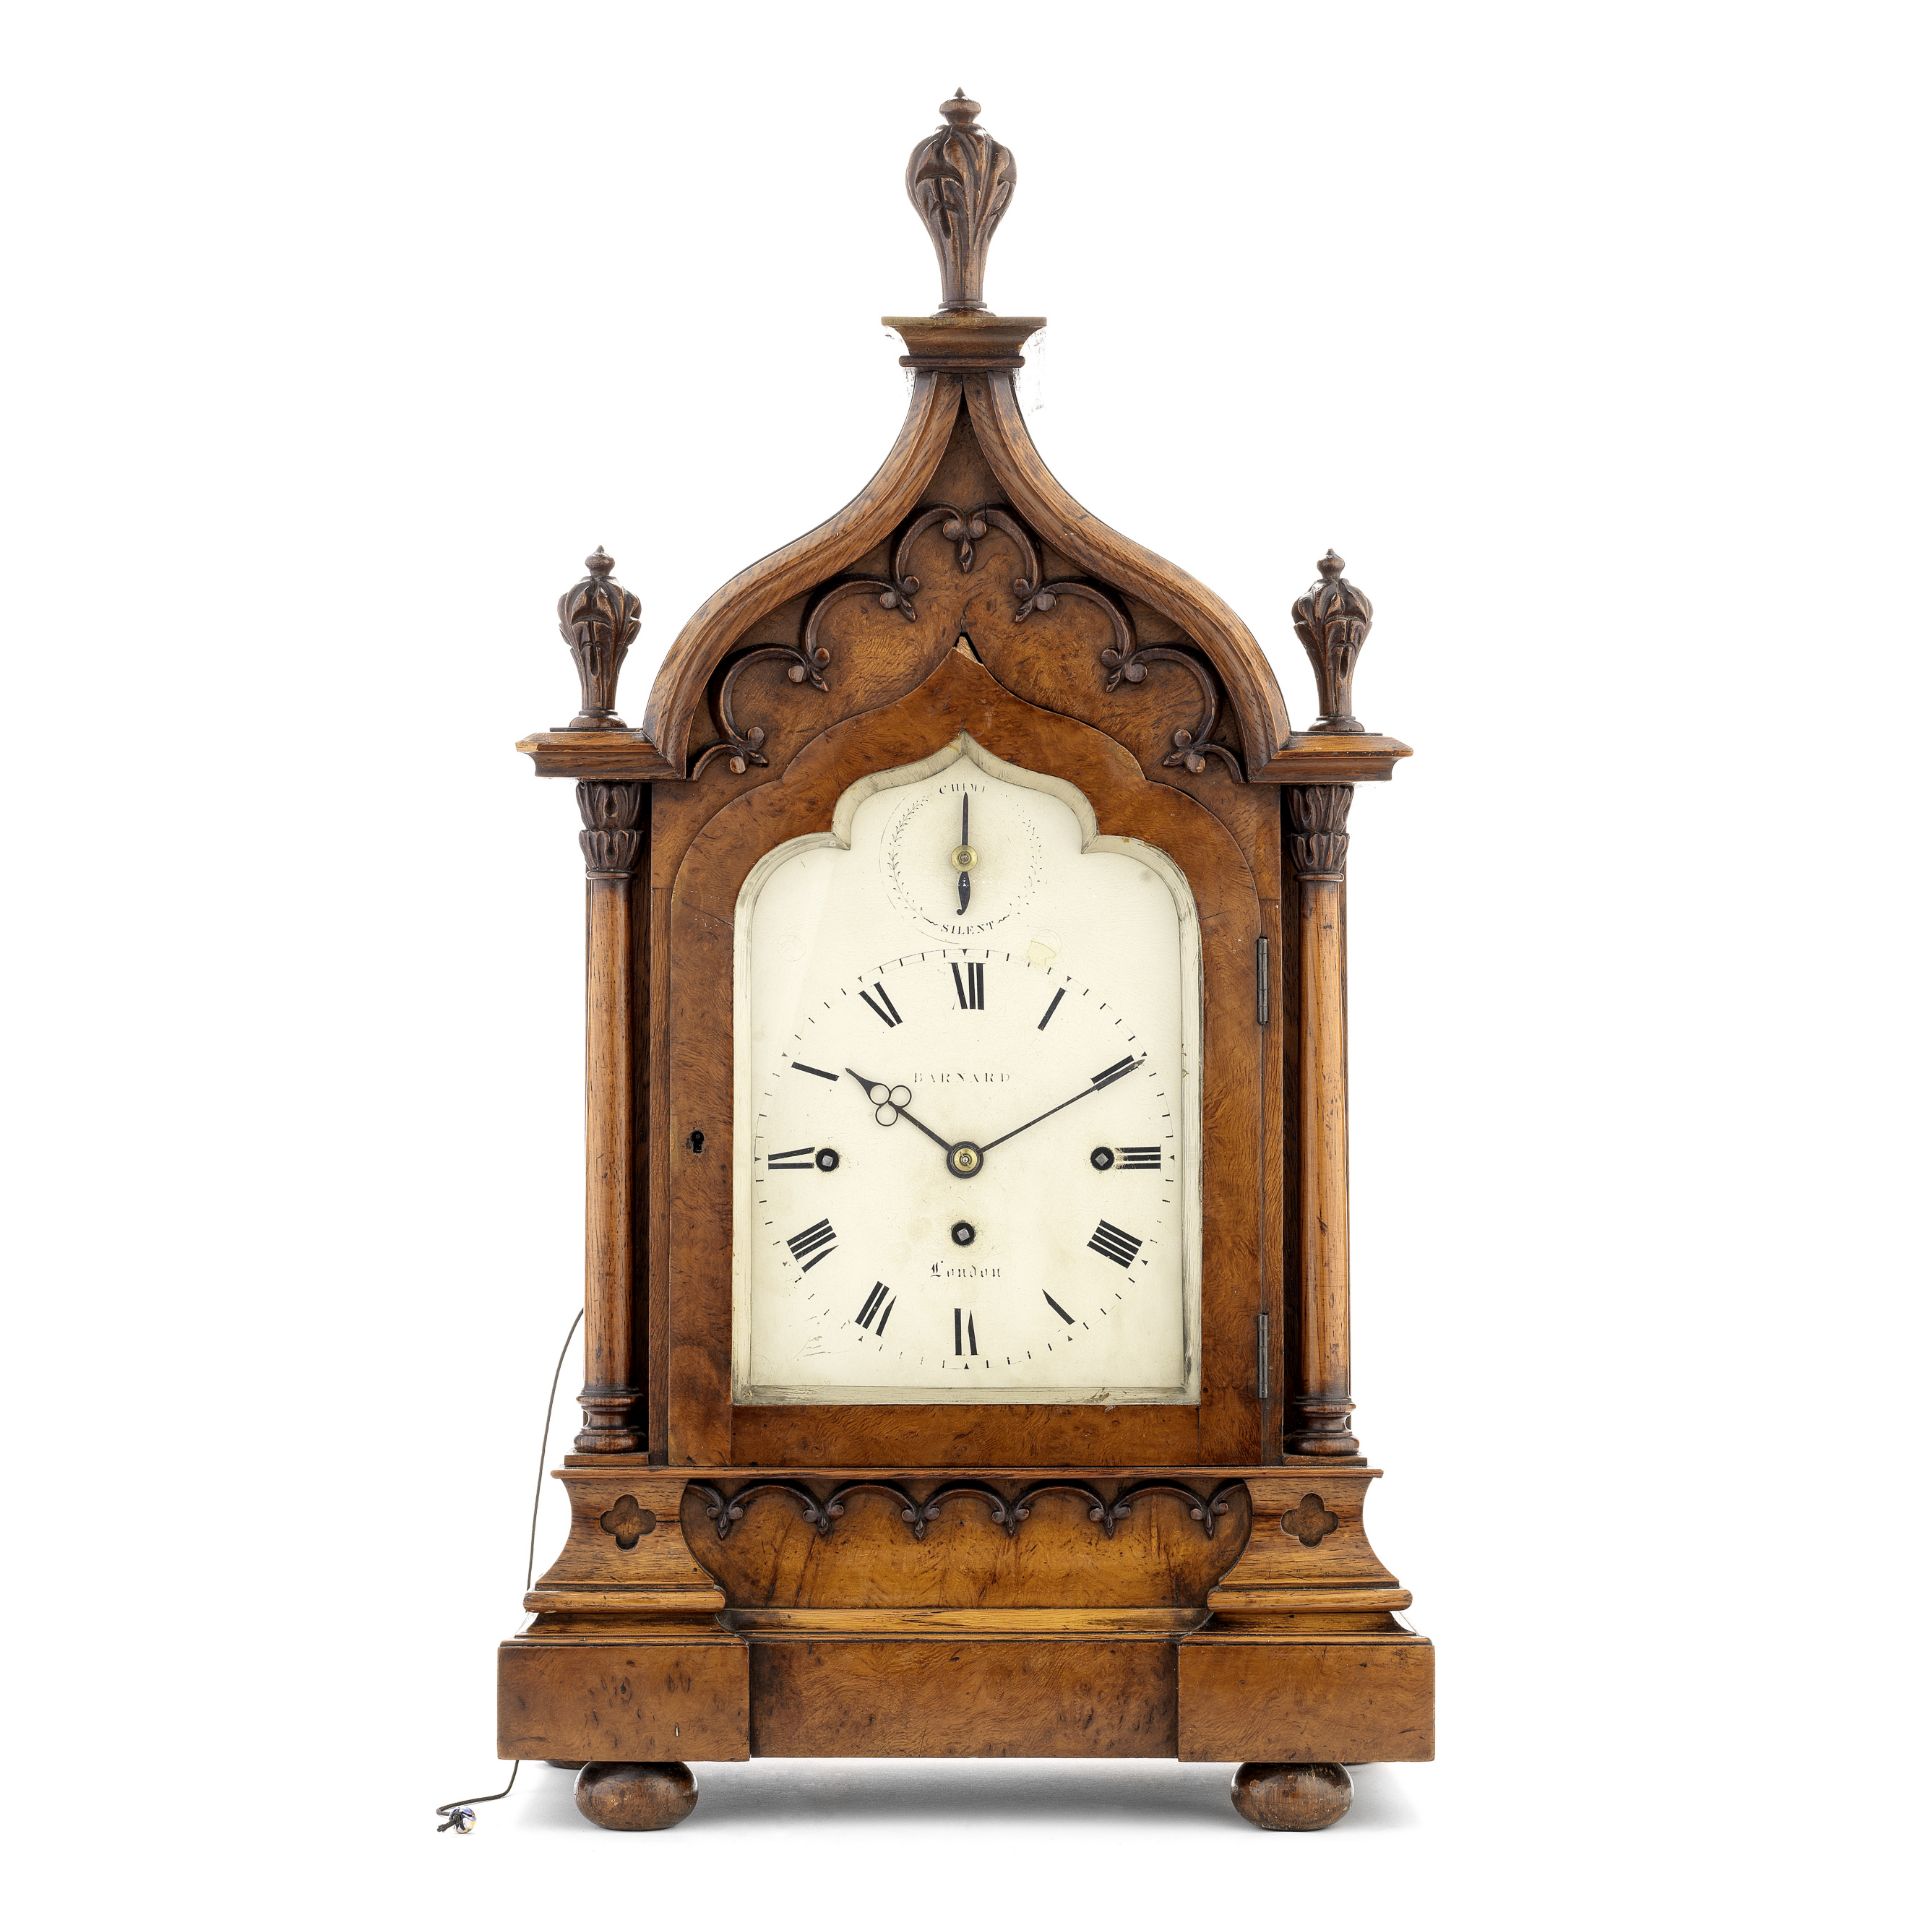 A mid 19th century oak chiming bracket clock with pull repeat the dial signed Barnard, London